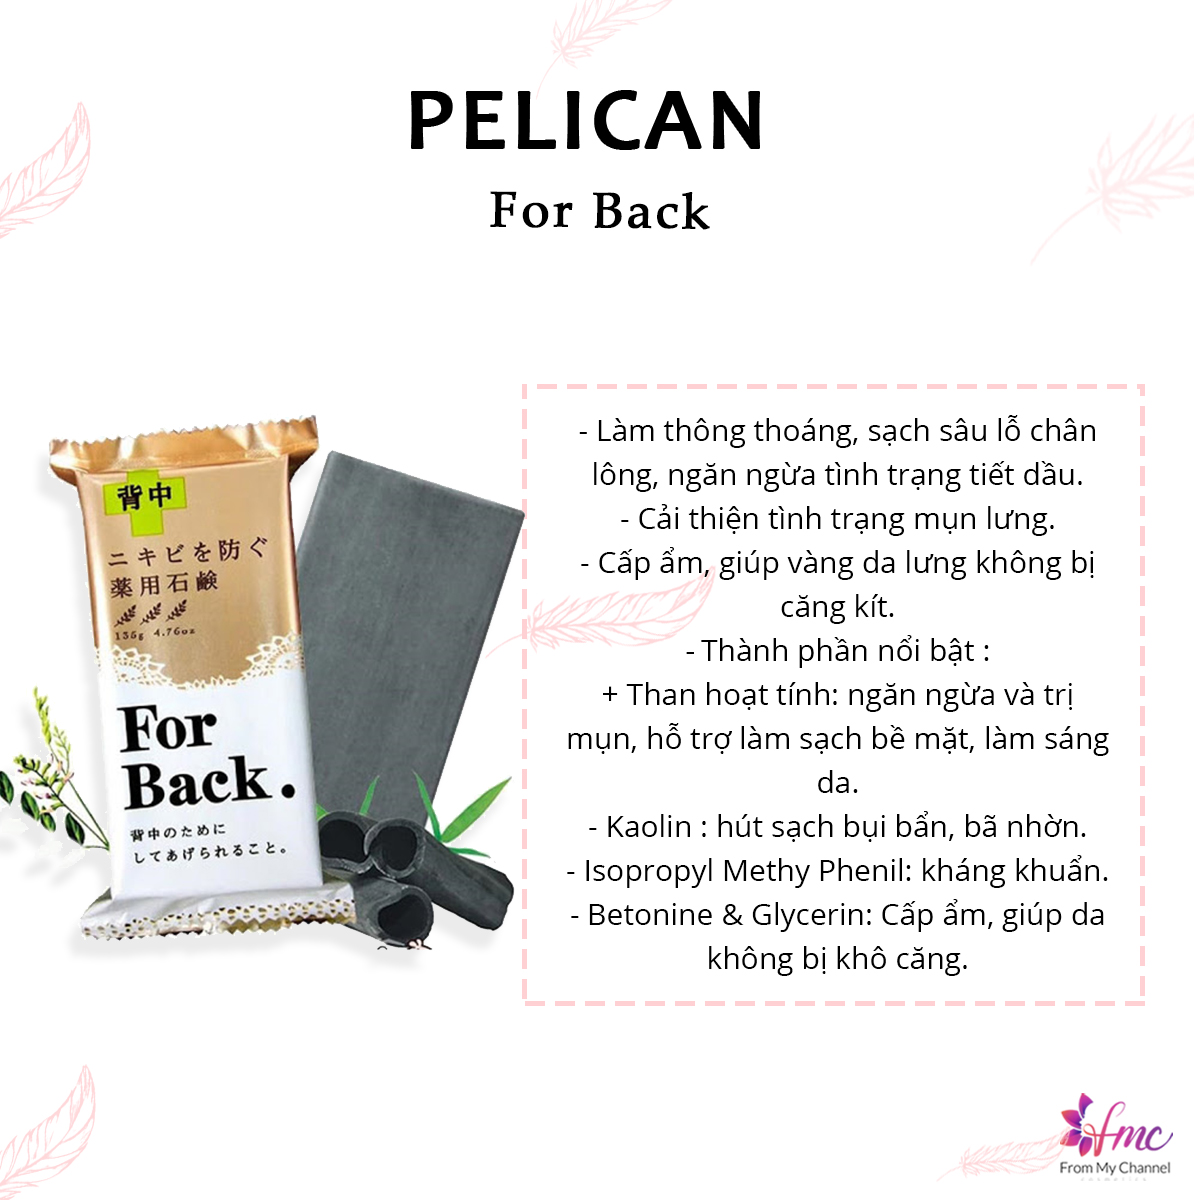 Pelican For Back Medicated Soap 135g (2pcs)